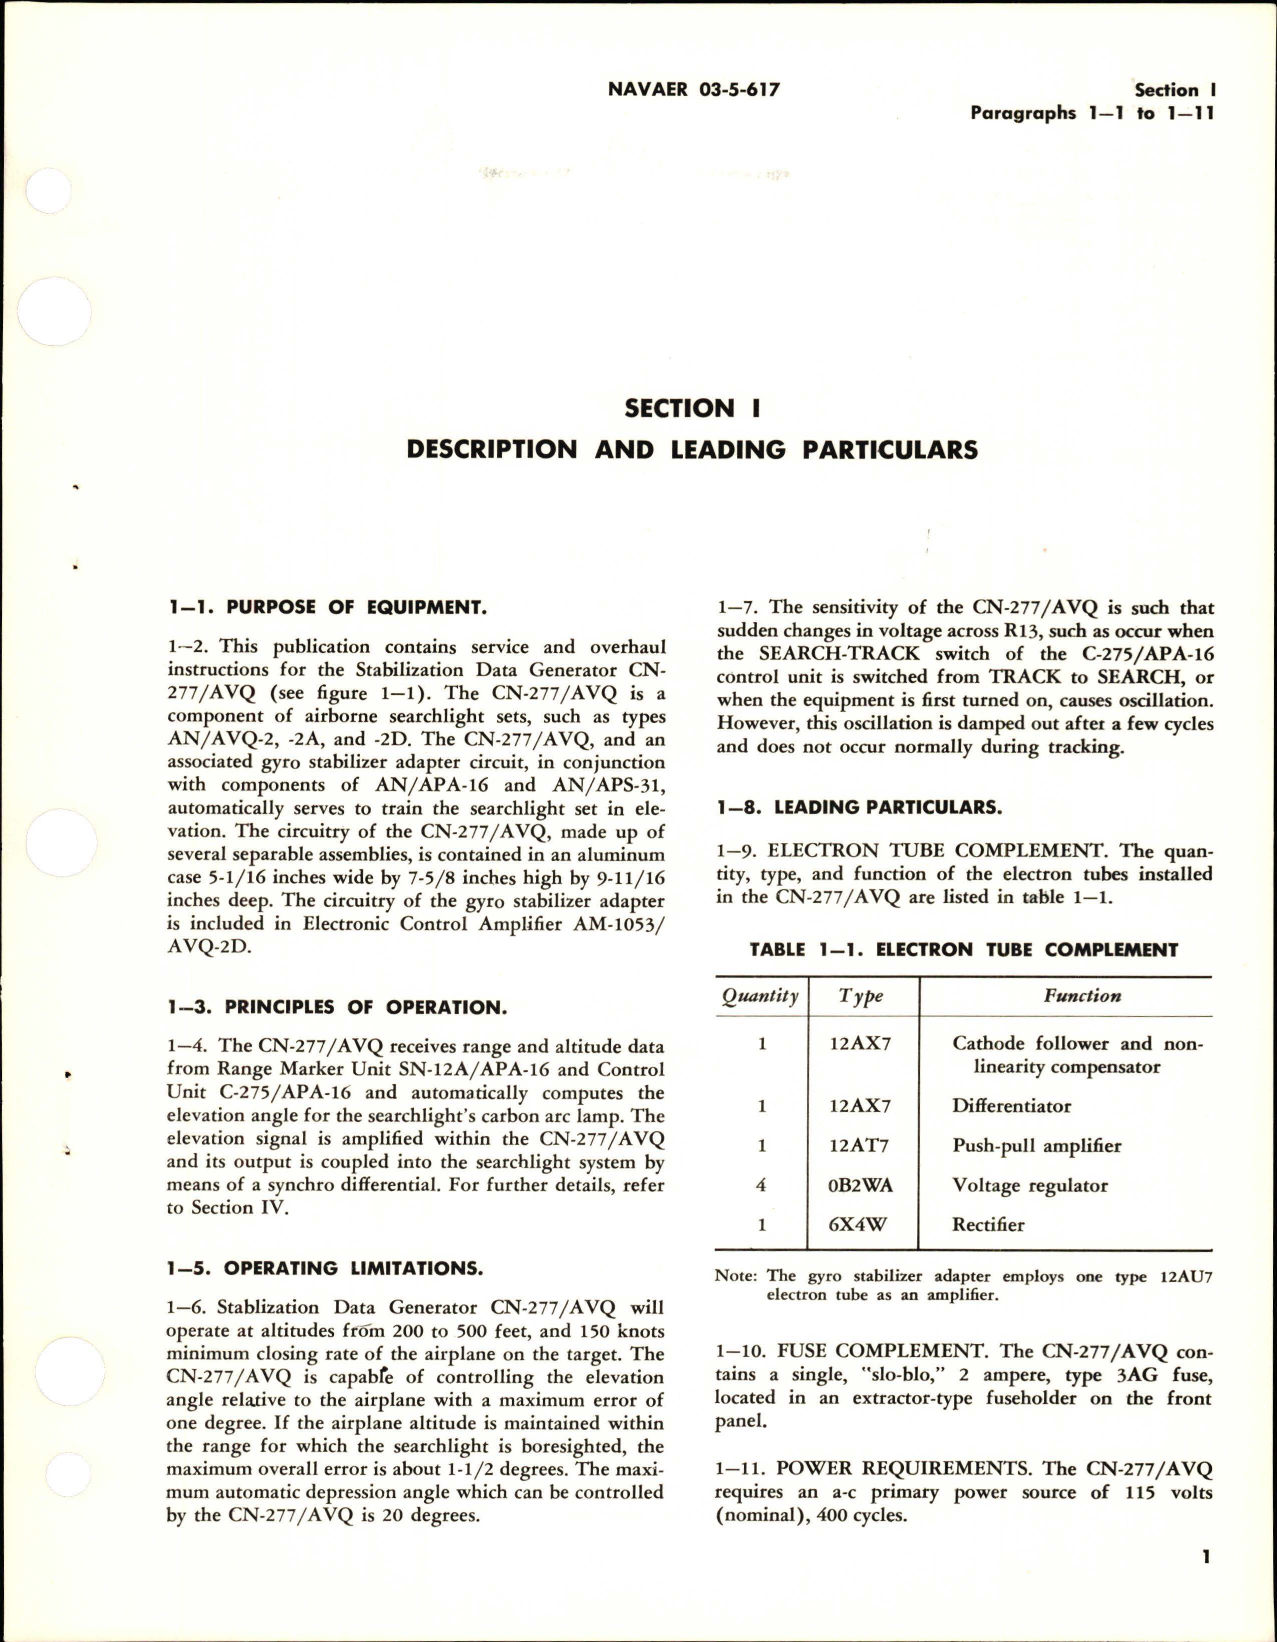 Sample page 7 from AirCorps Library document: Service and Overhaul Instructions for Stabilization Data Generator - CN-277-AVG